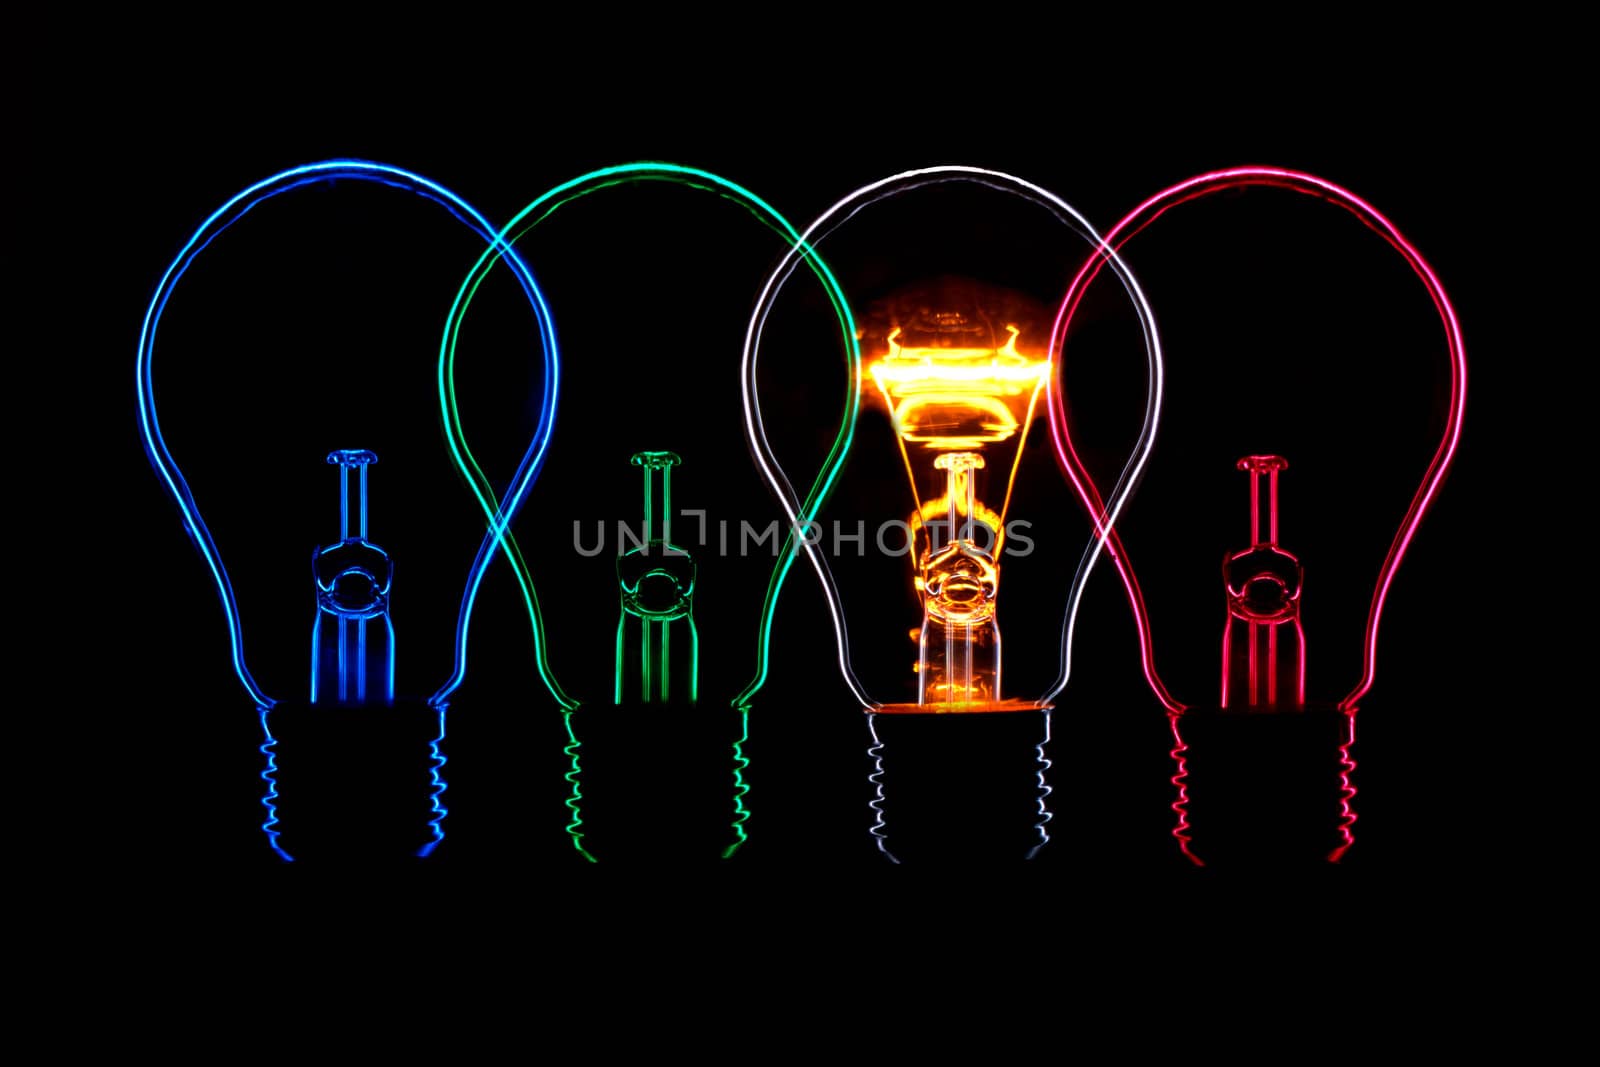 Four lights, symmetry, outline, lights, blue, green, white and red, white bulb burning with Contour Lines of metal coil